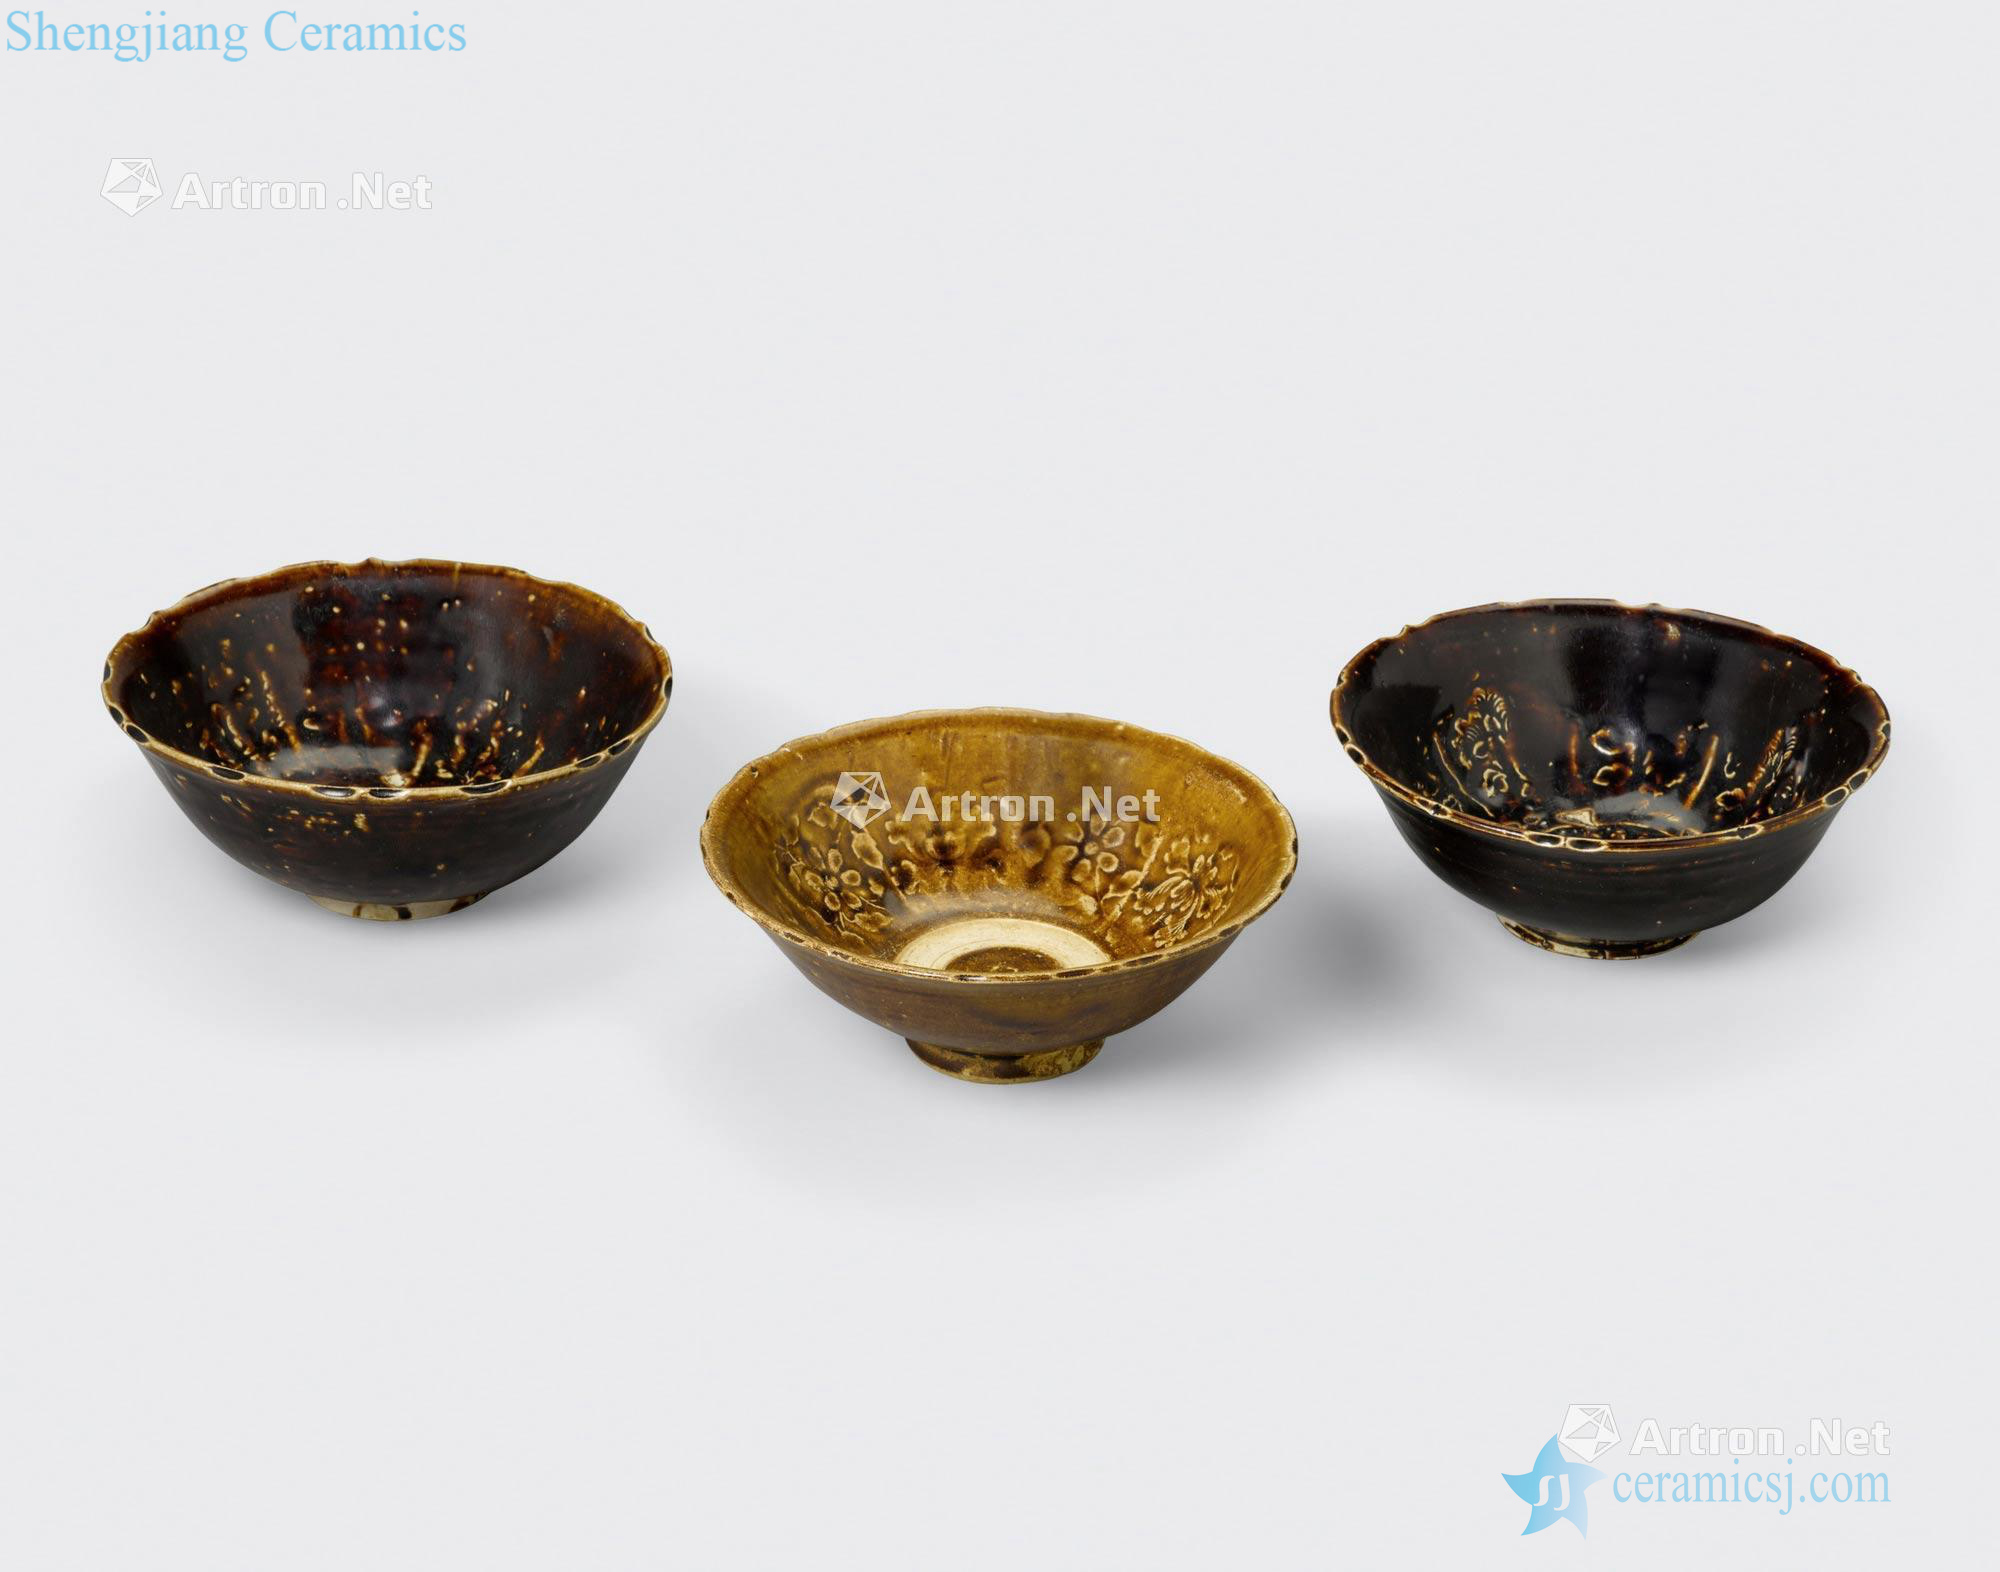 Tran - Le dynasties, 14 th/15 th century A GROUP OF THREE BROWN GLAZED BOWLS WITH IMPRESSED DECORATION